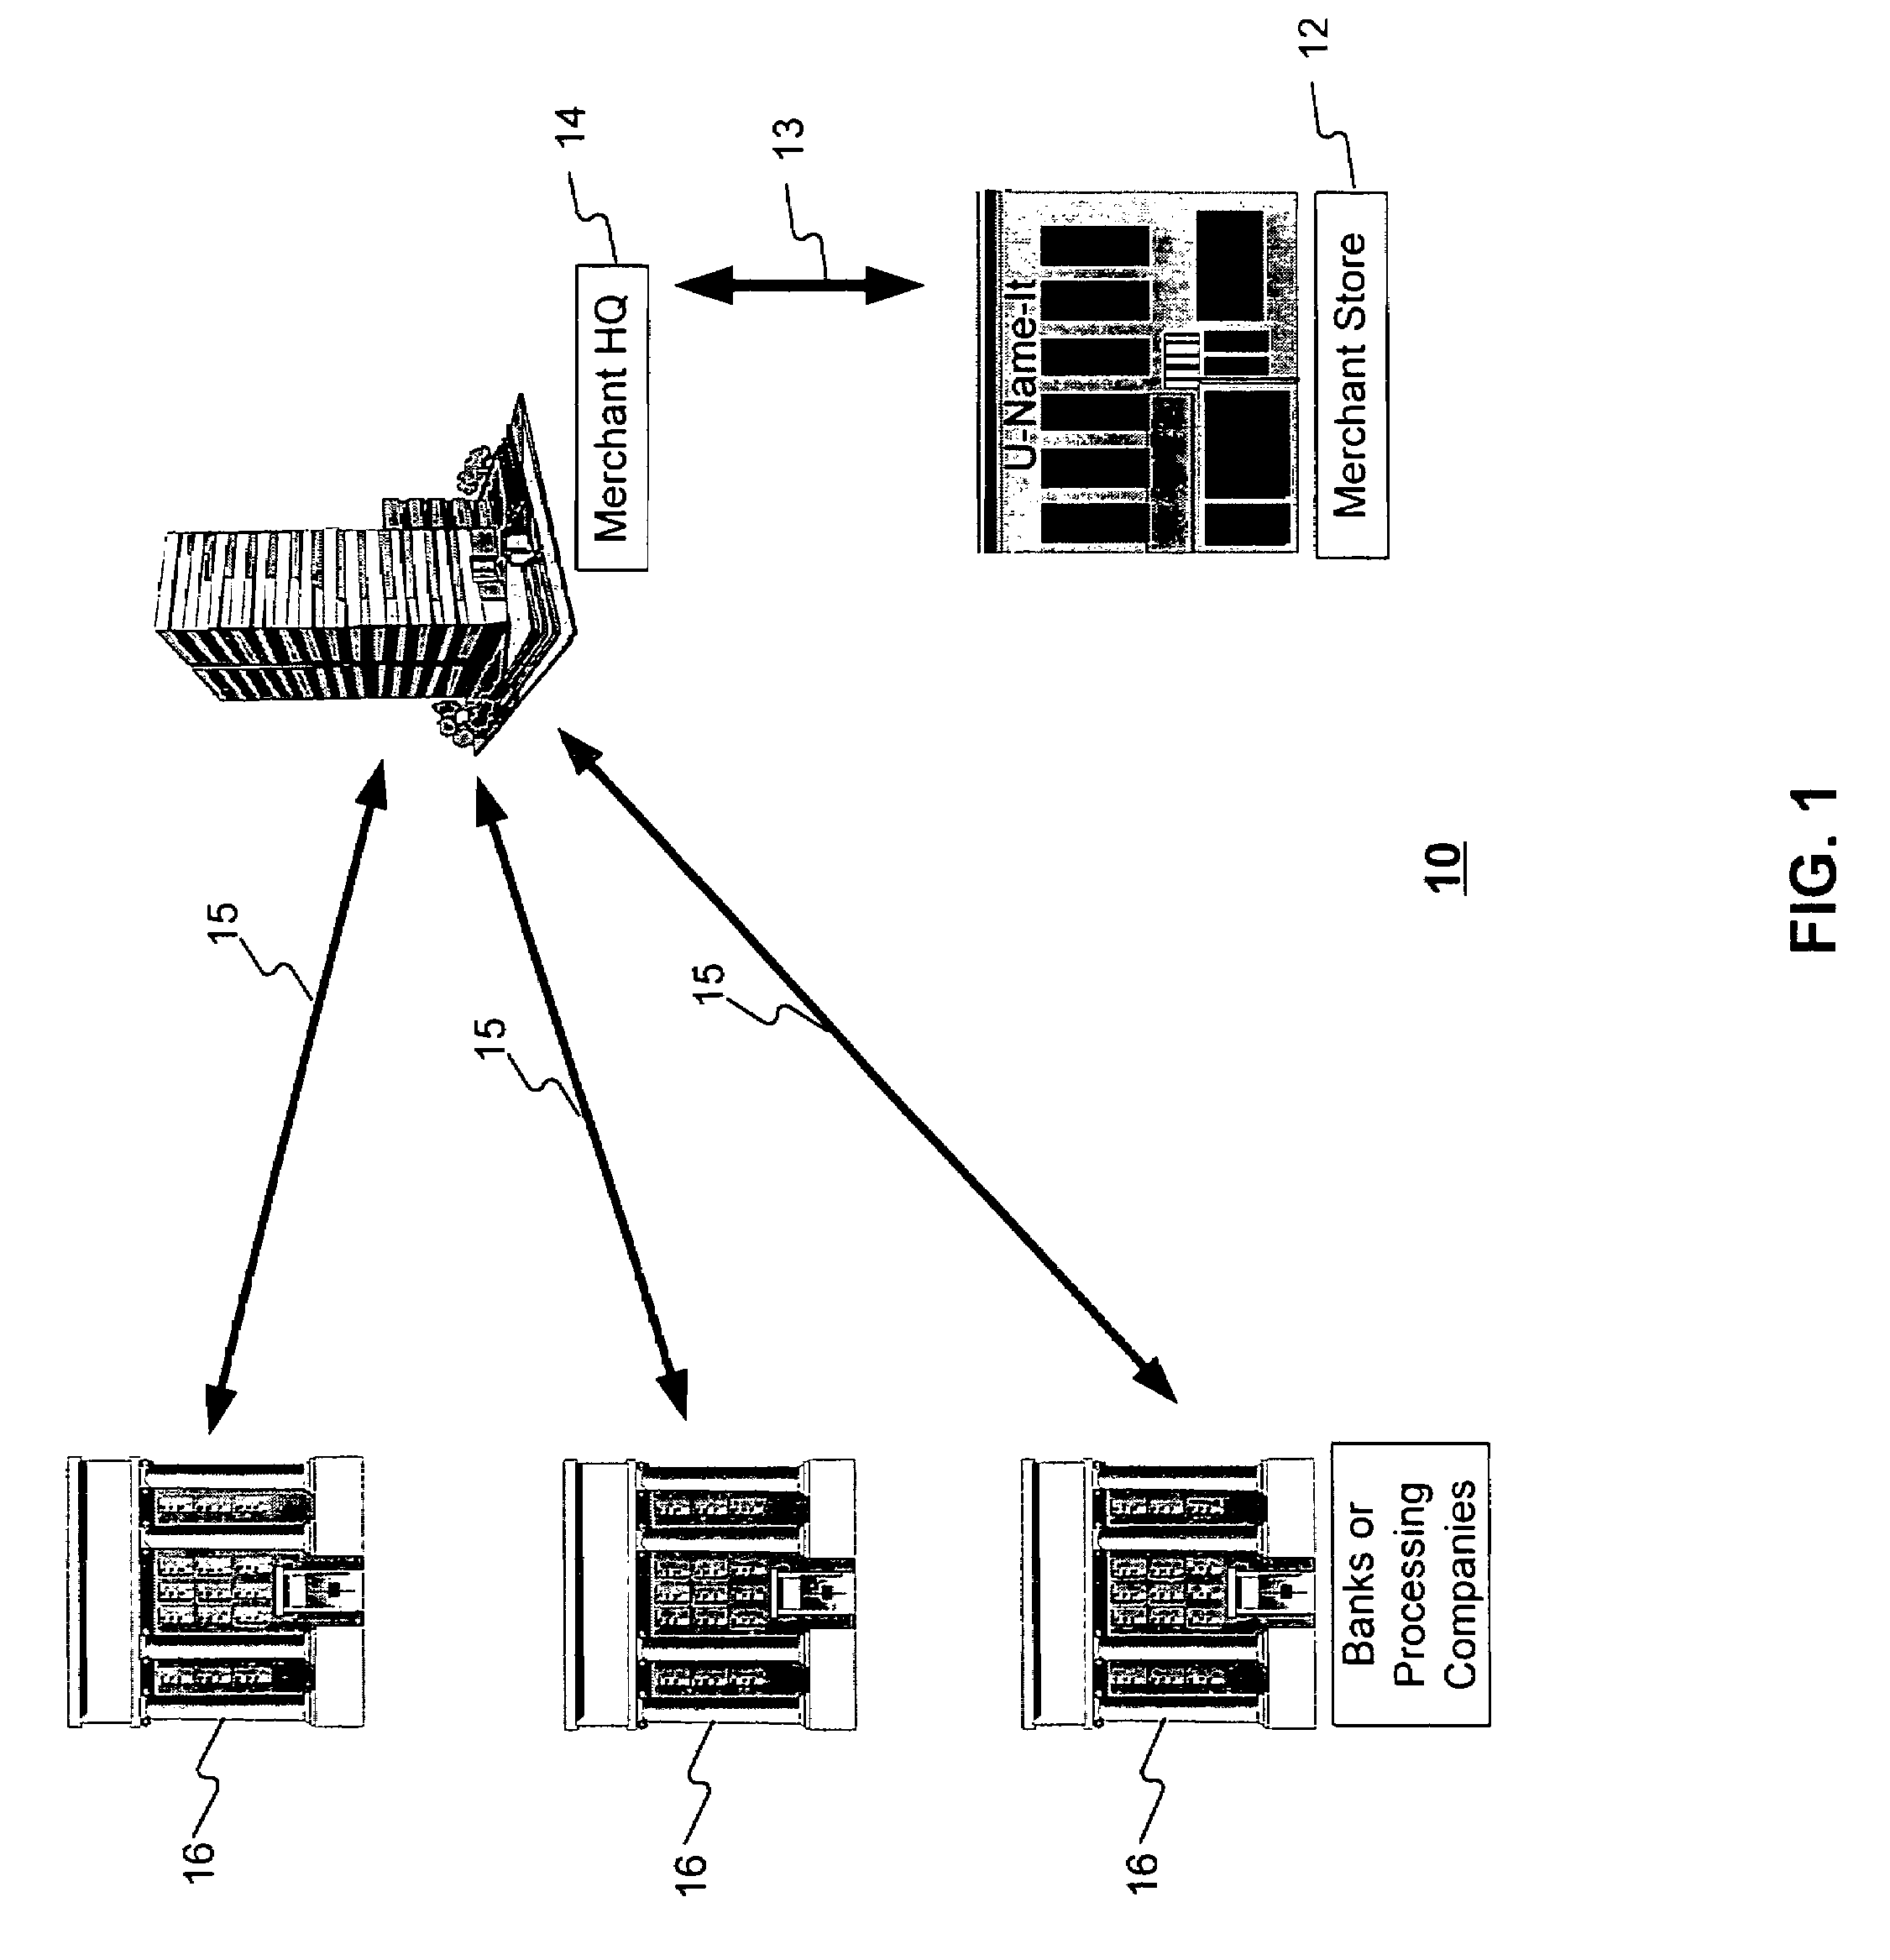 System and method for processing financial transactions